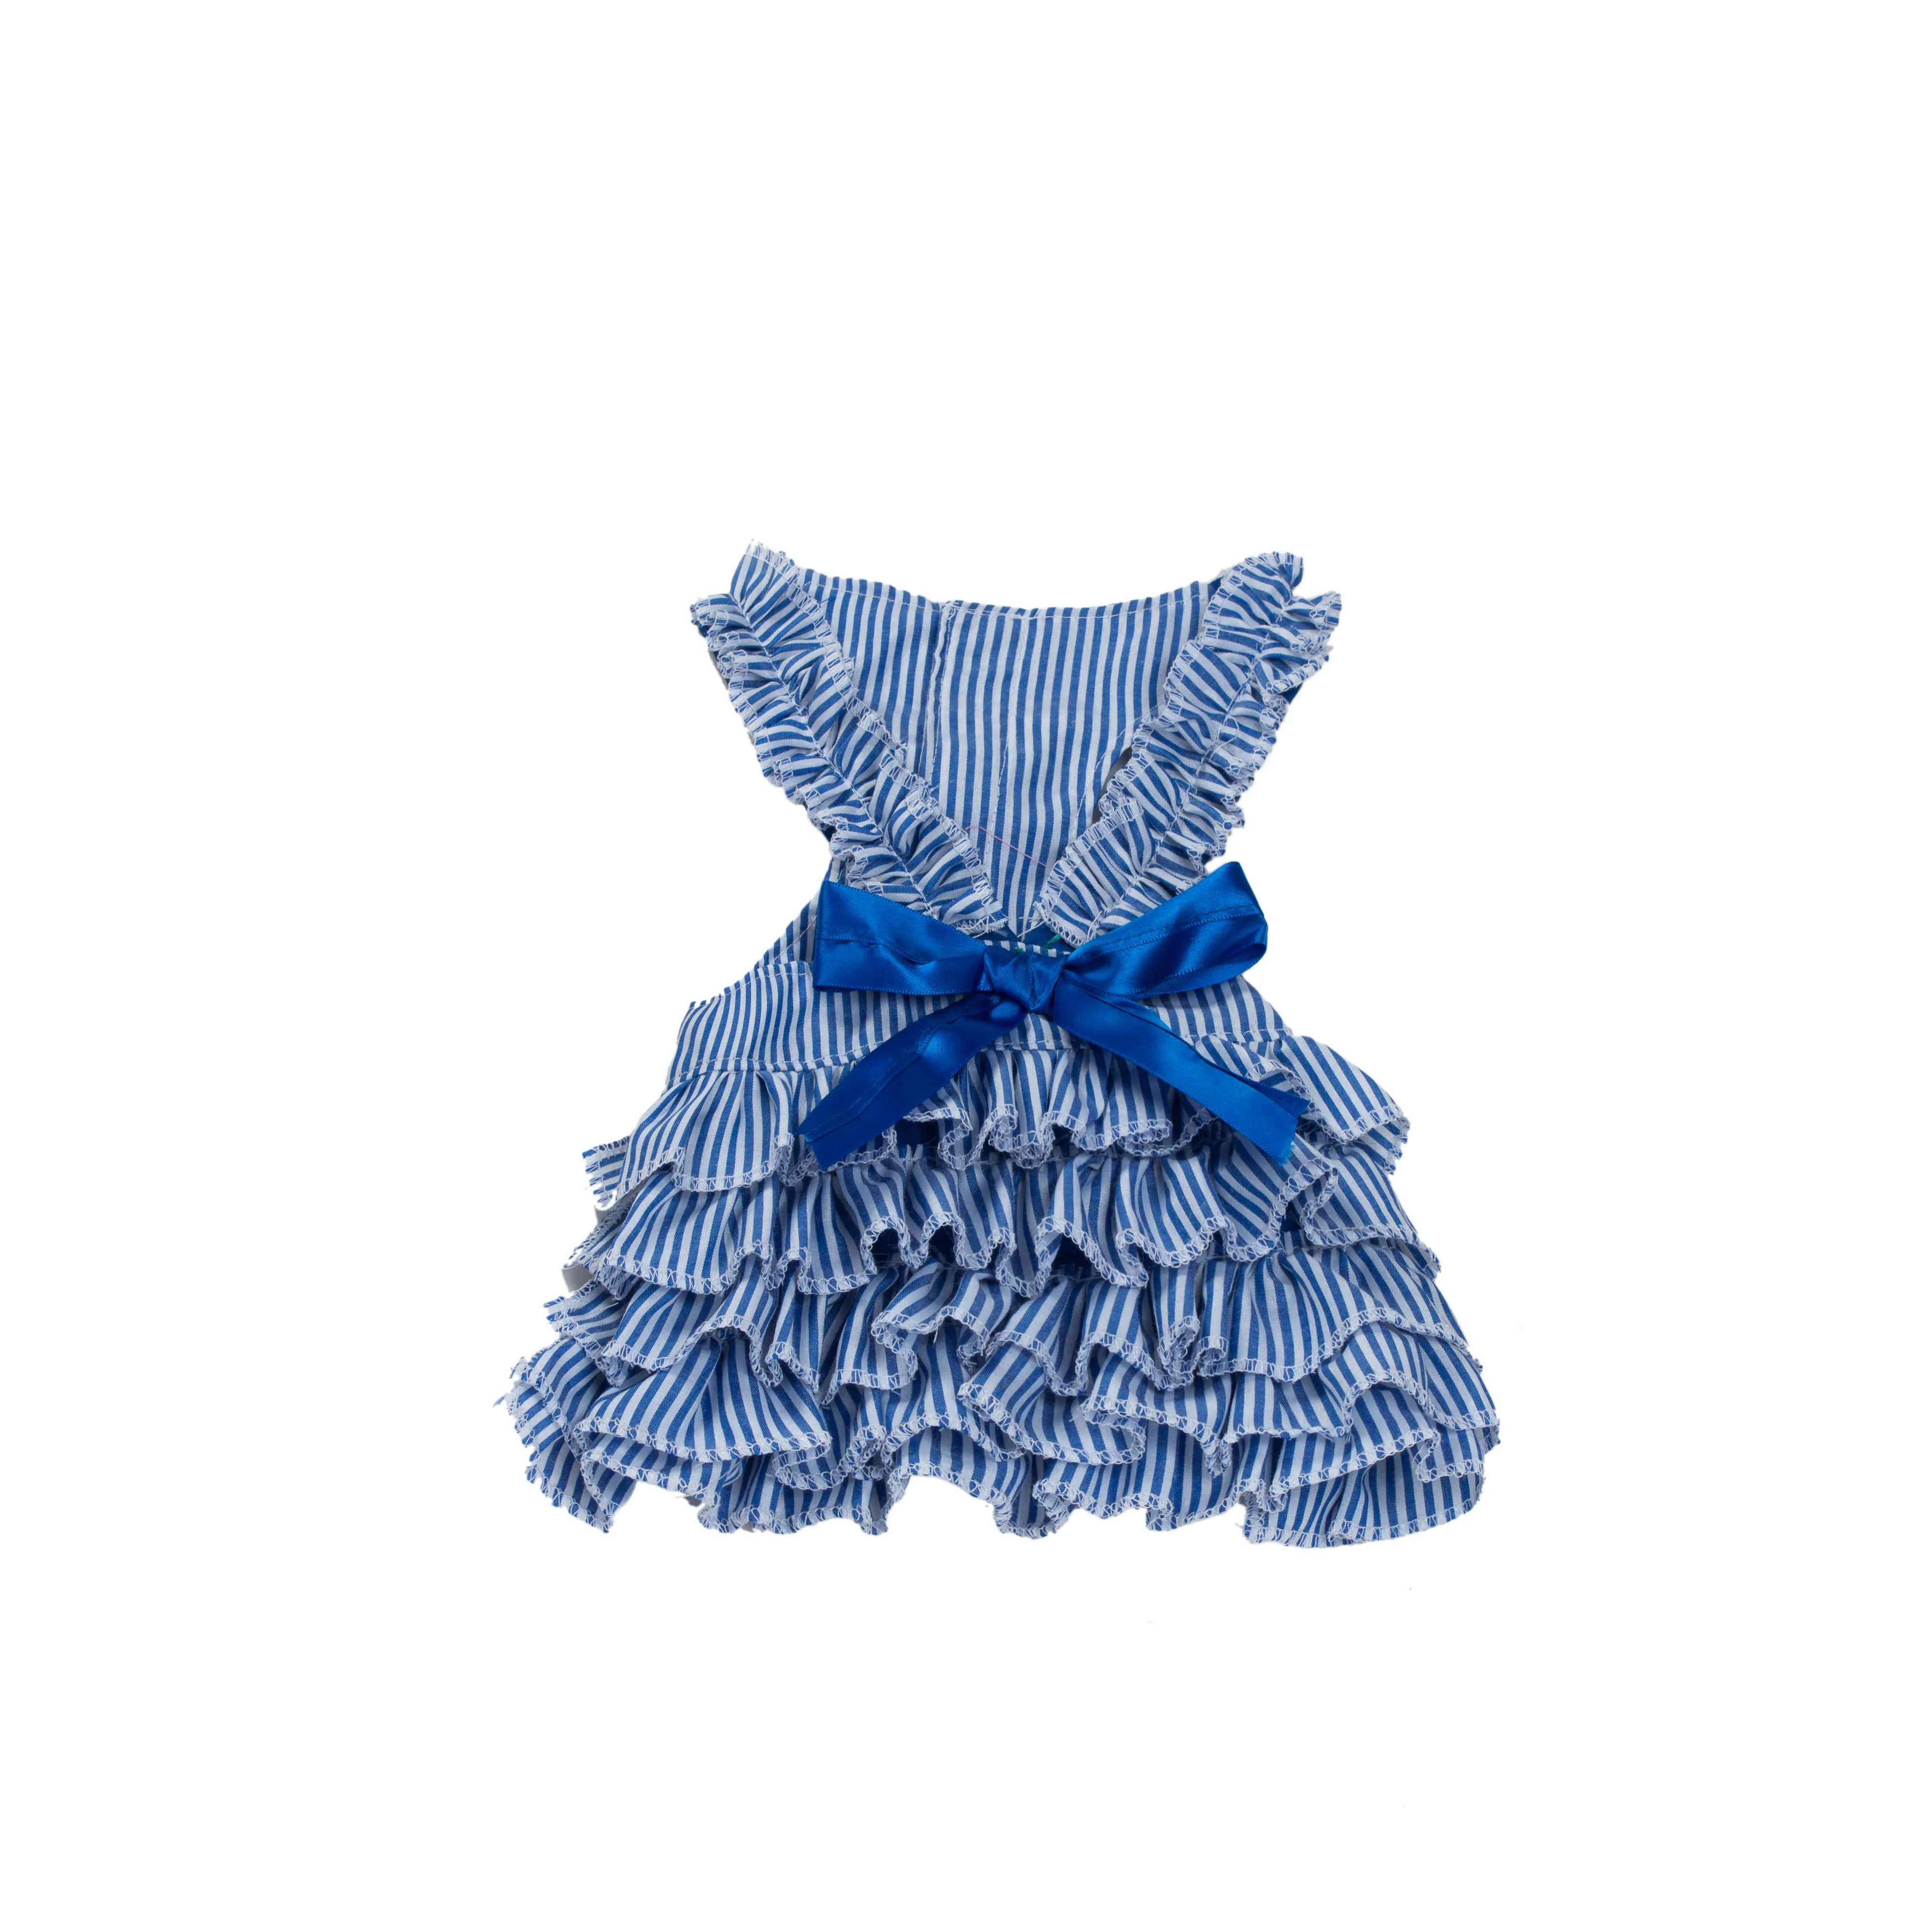 Factory direct selling high quality cat skirt blue and white striped dress girl dog pet clothing pet grooming clothes